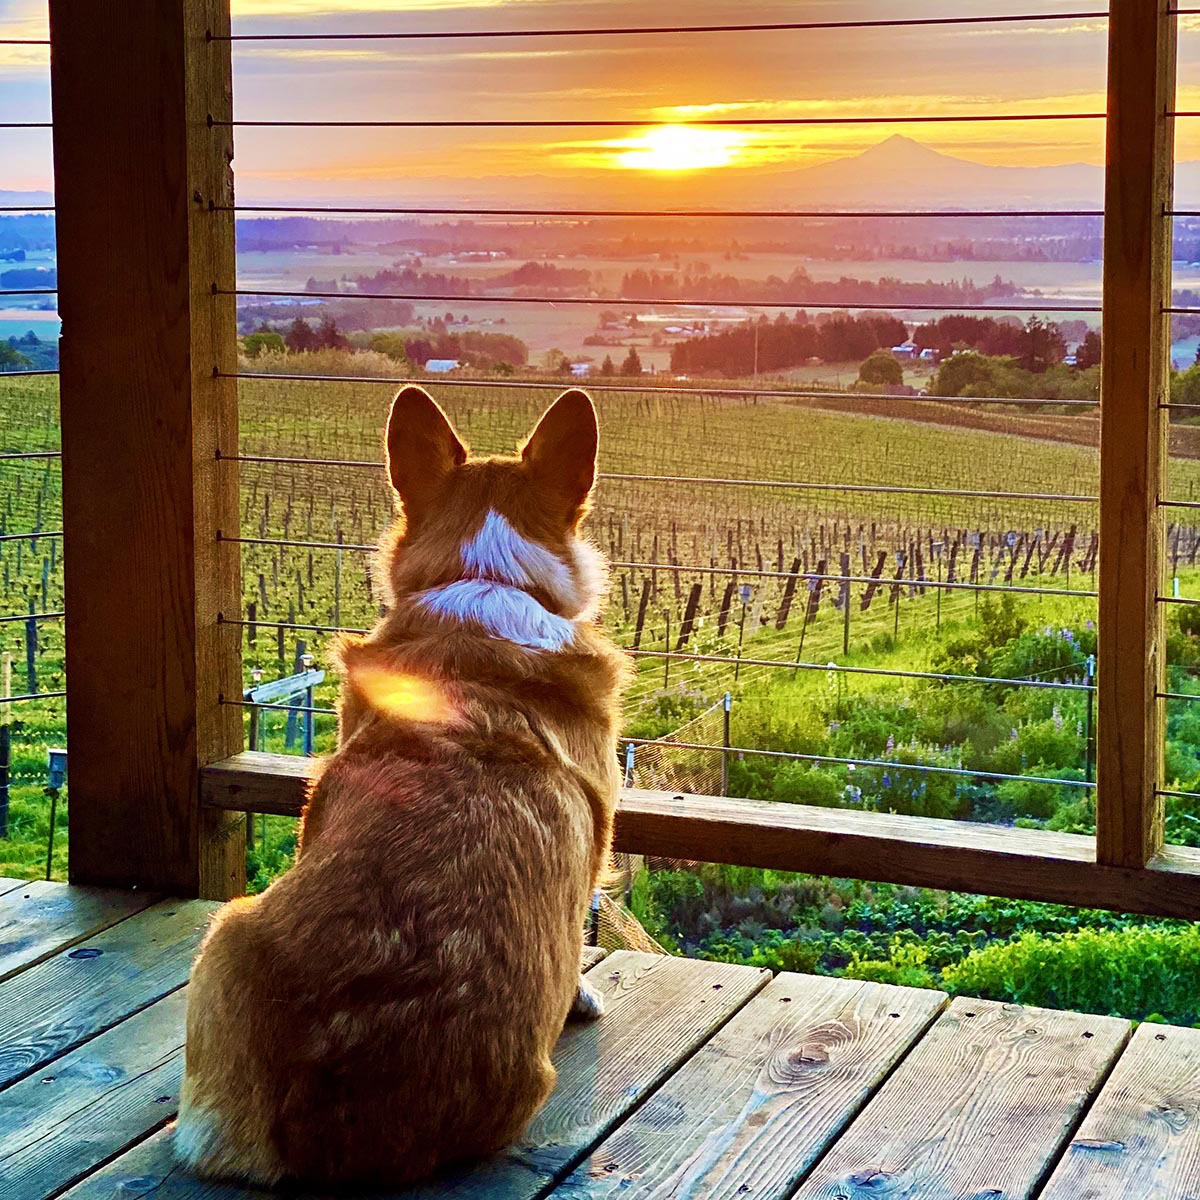 A corgi dog sits calmly on a wooden deck while watching the sun rise behind a vineyard in Willamette Valley, Oregon.